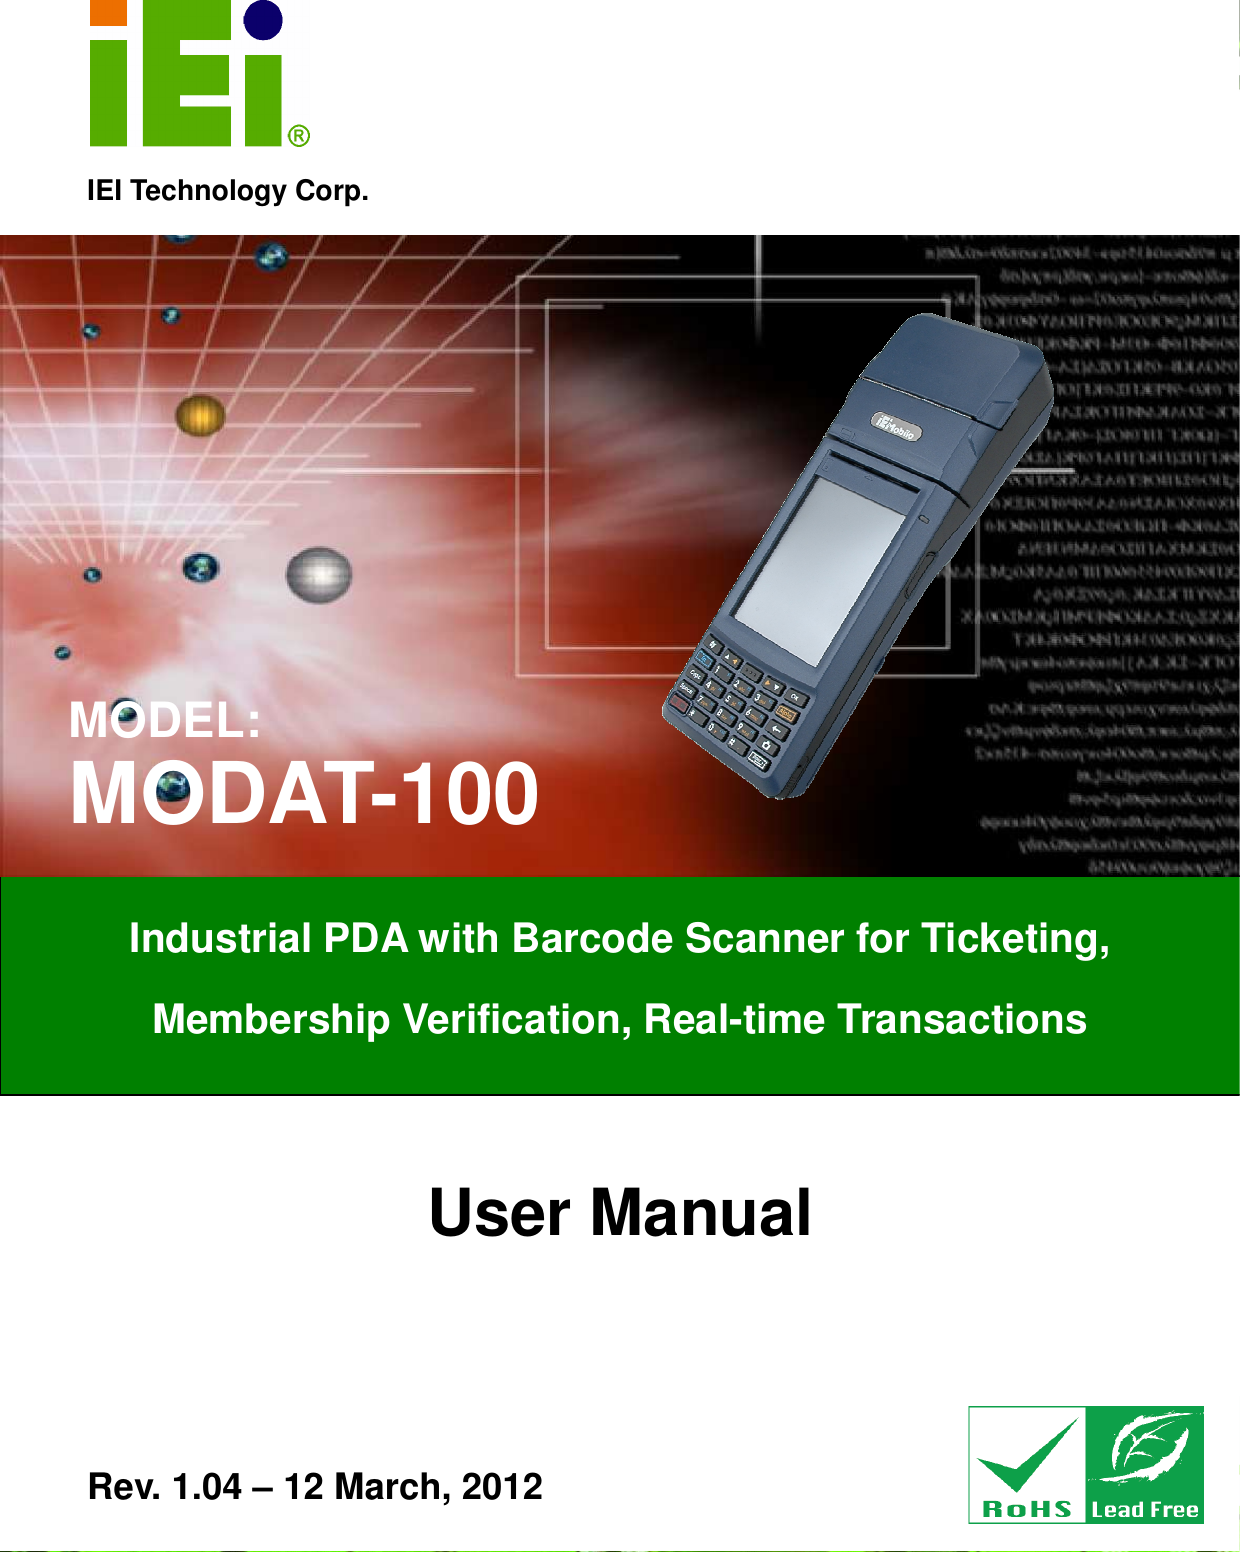   MODAT-100 Page 1 IEI Technology Corp. User Manual  MODEL: MODAT-100 Industrial PDA with Barcode Scanner for Ticketing,   Membership Verification, Real-time Transactions  Rev. 1.04 – 12 March, 2012 